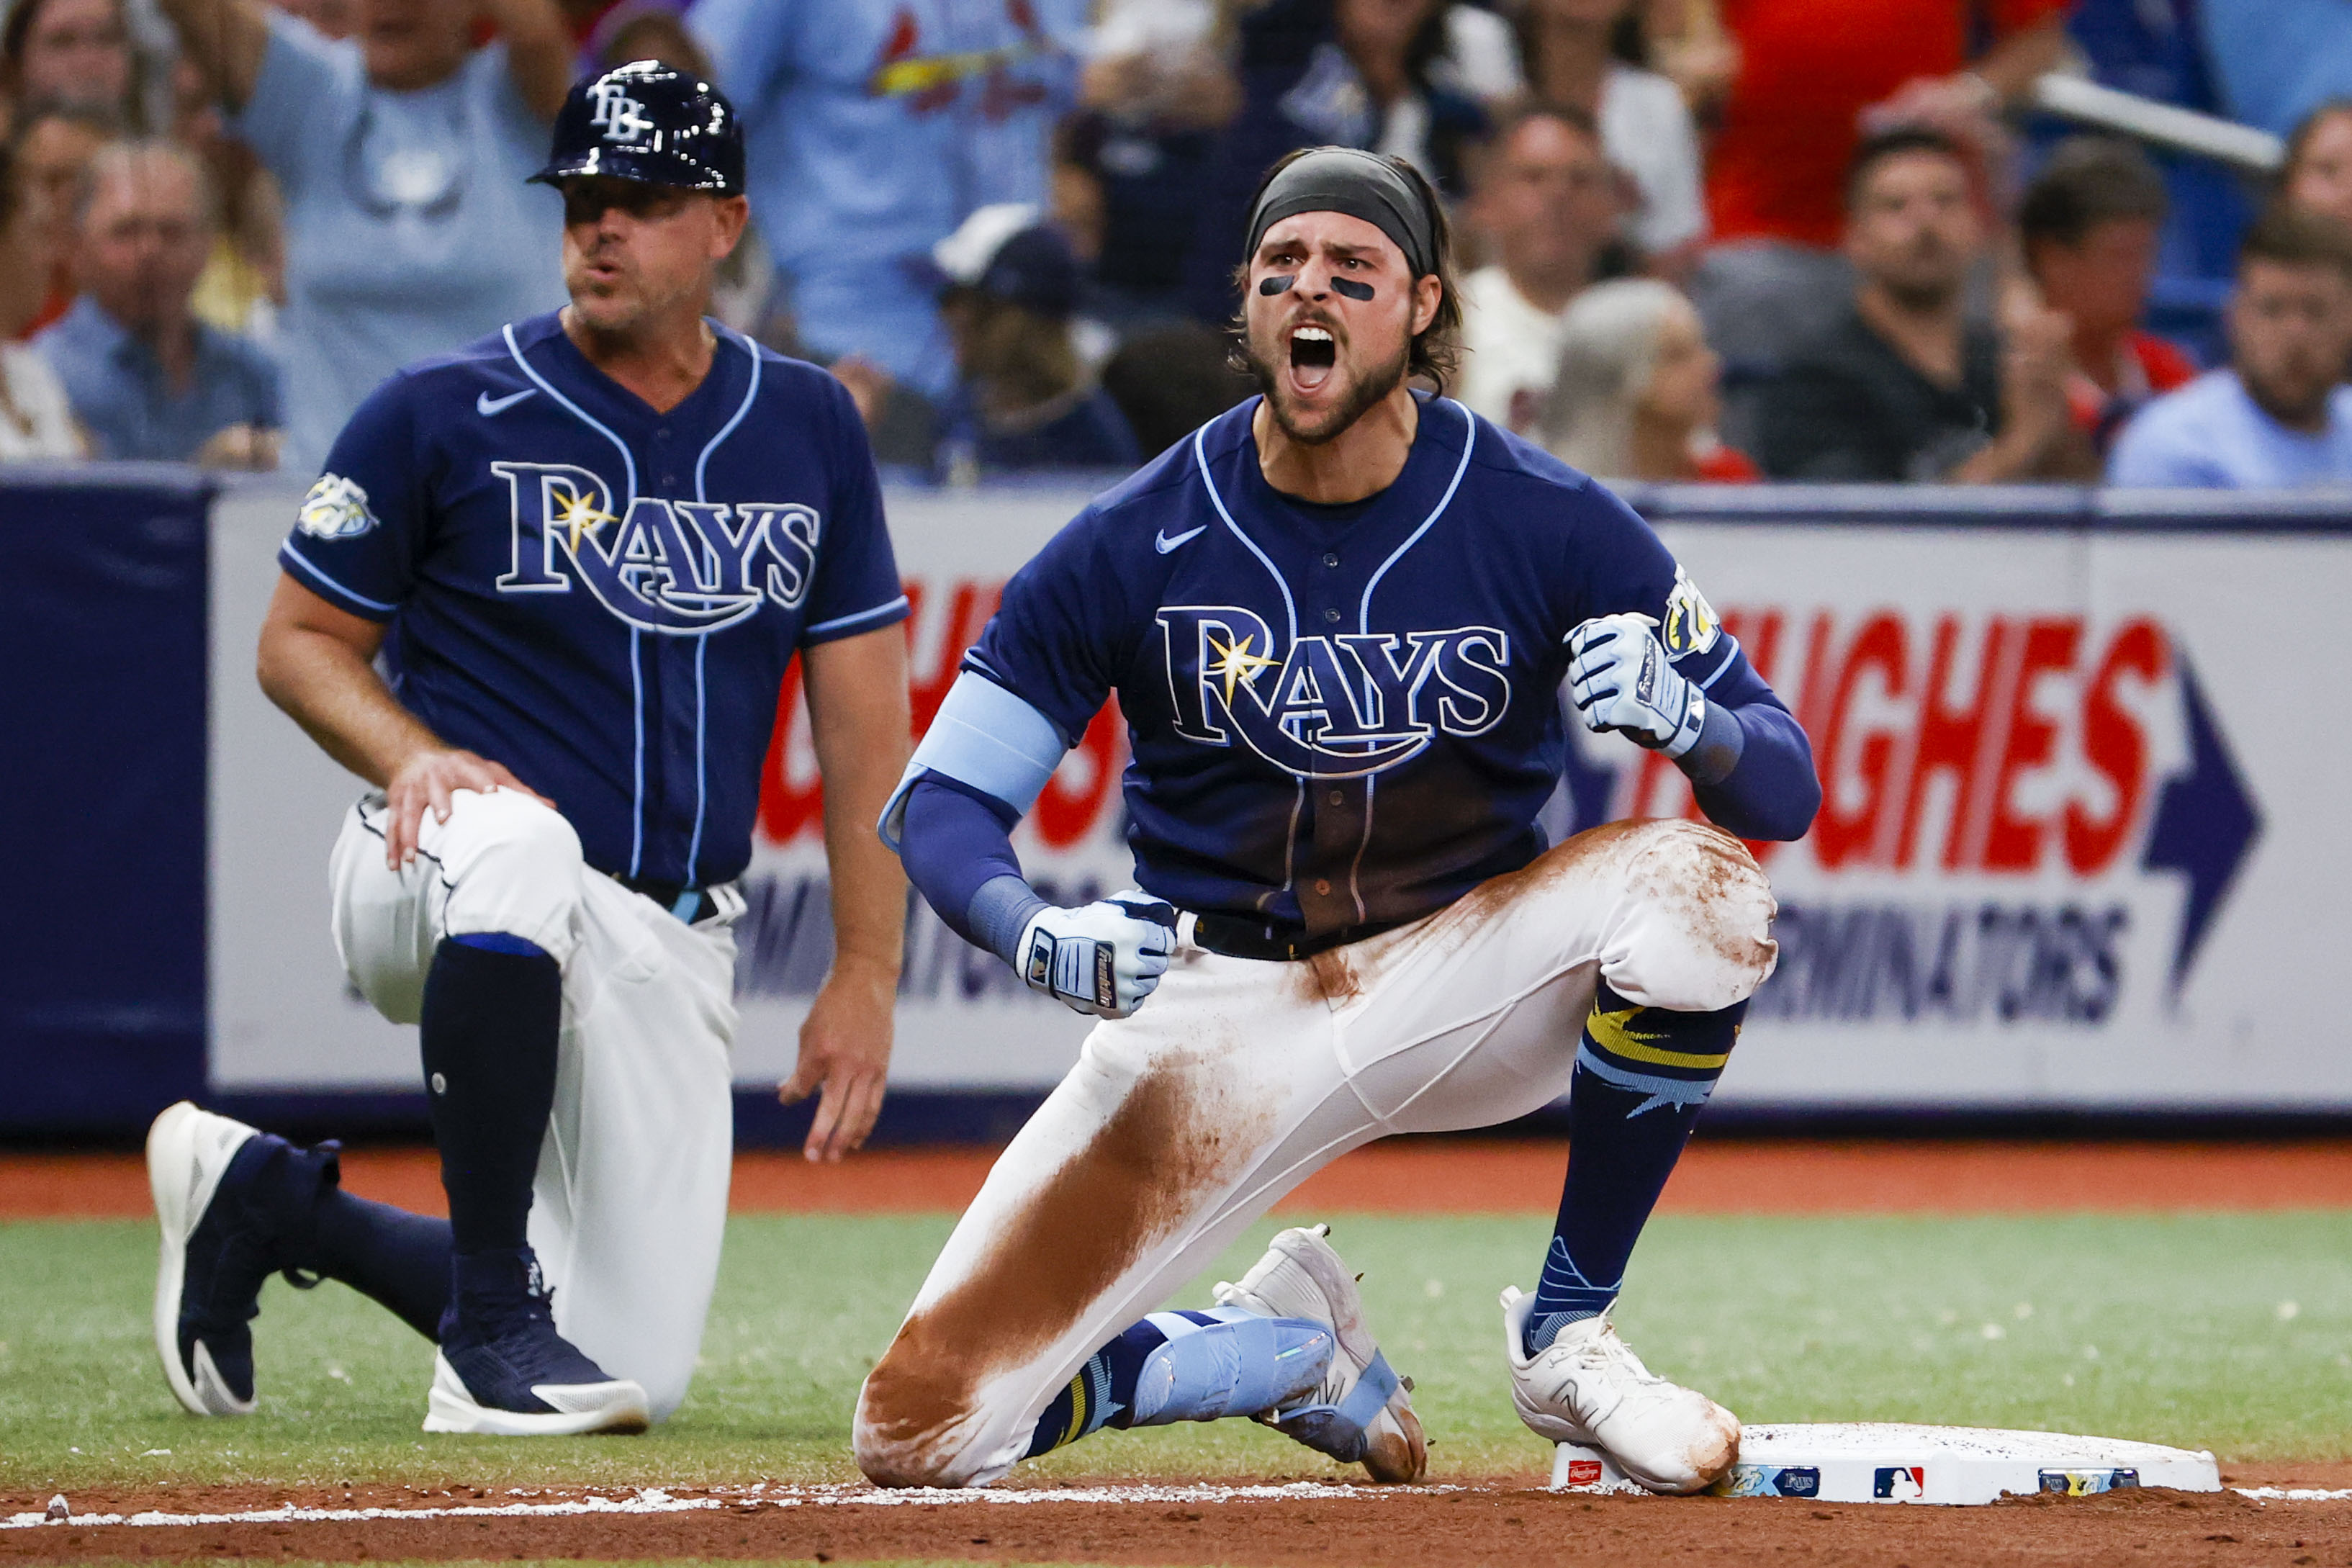 Call Harold Ramirez a lot of things for Rays, including Mr. Happy